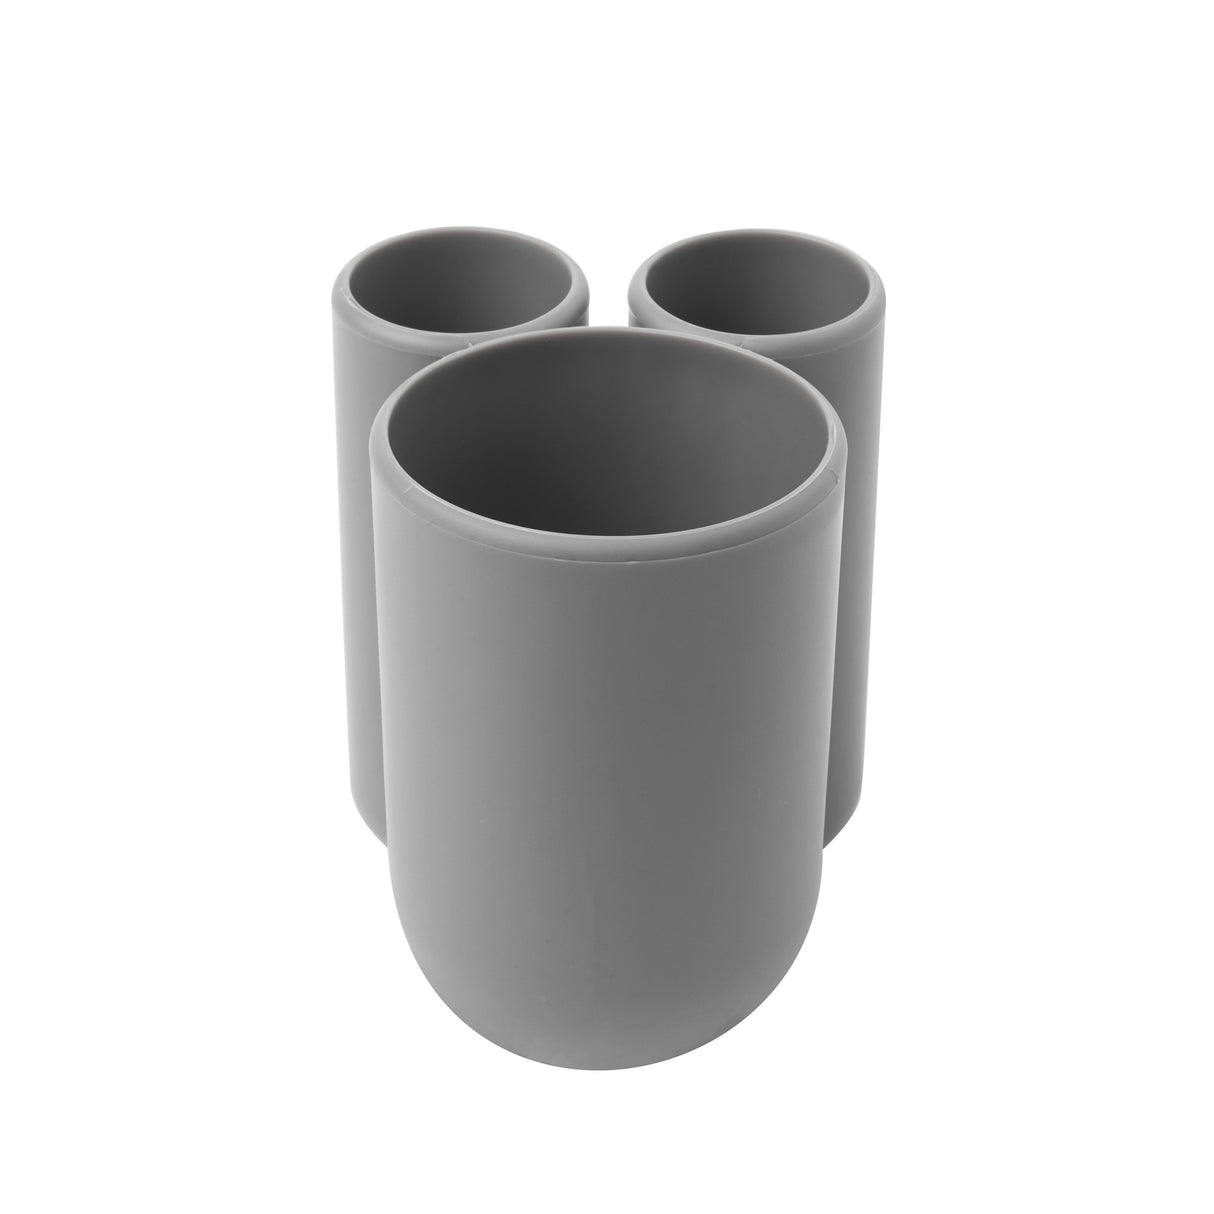 Tumblers & Toothbrush Holders | color: Gray | https://player.vimeo.com/video/115122756